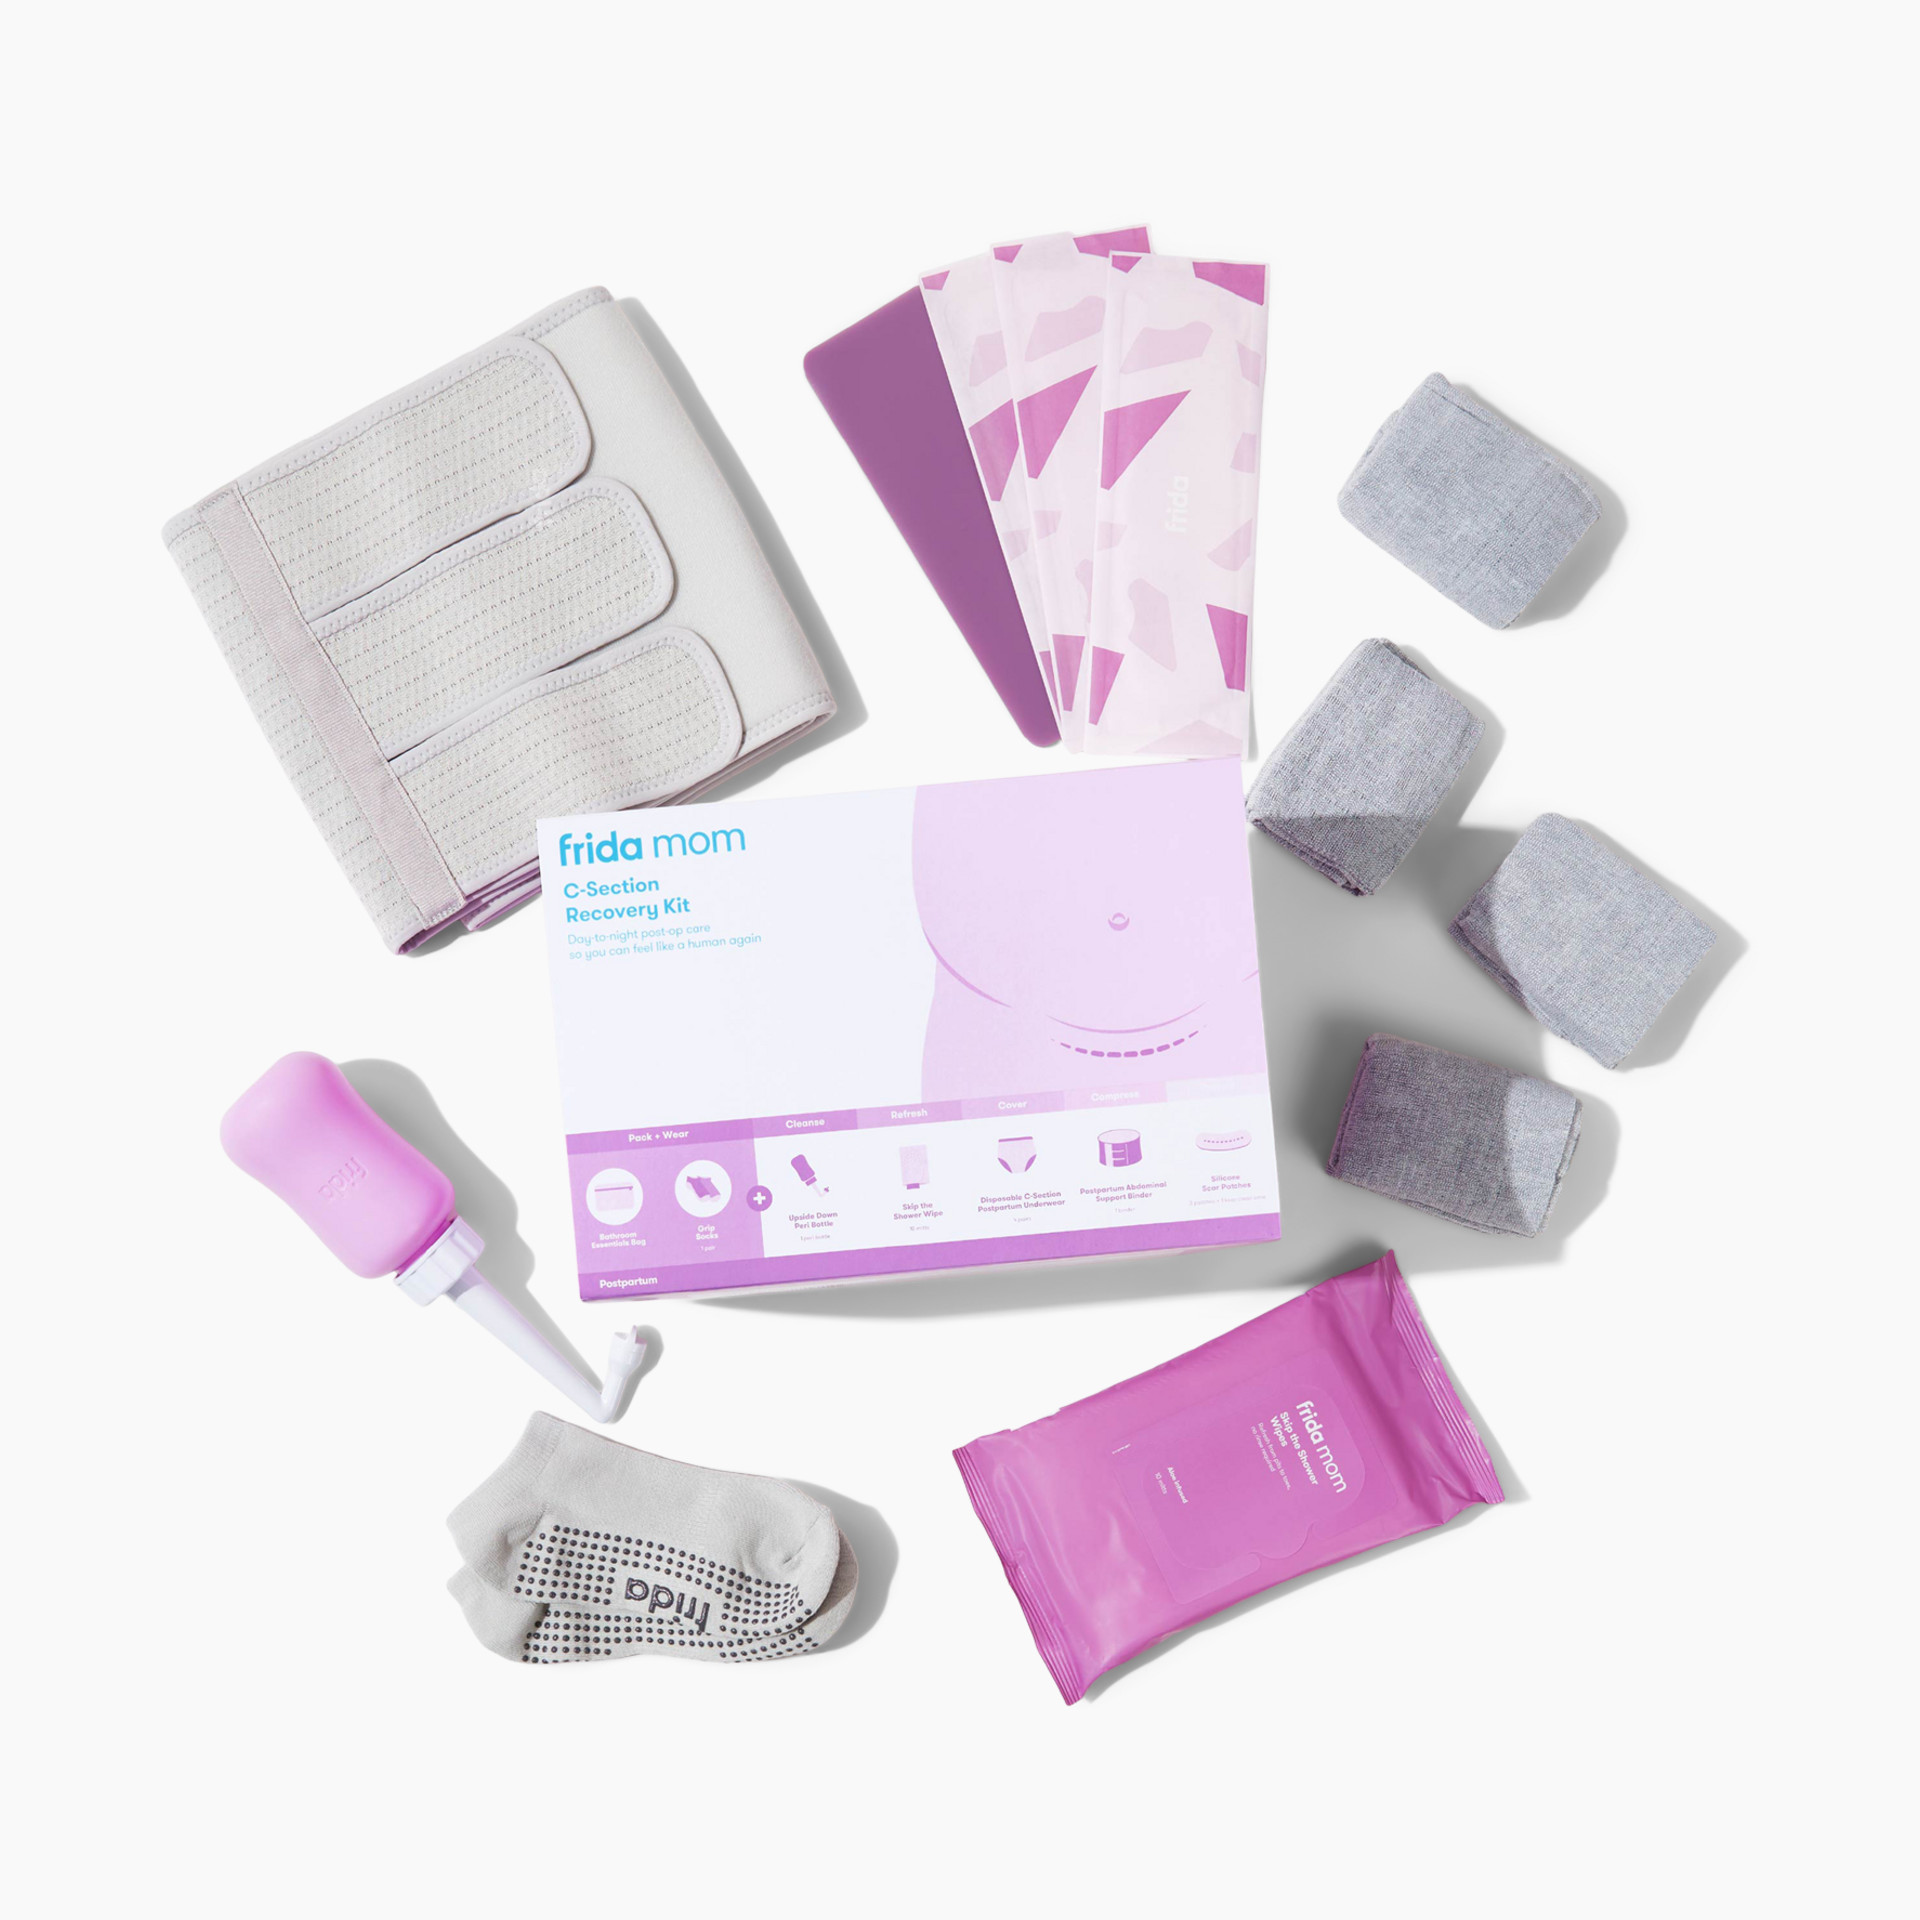 Mom and Baby Hospital Bag Essentials Set - Complete Postpartum Care Kit  with Toiletry Must-Haves, Postpartum Essentials, Baby Essentials, and New  Mom